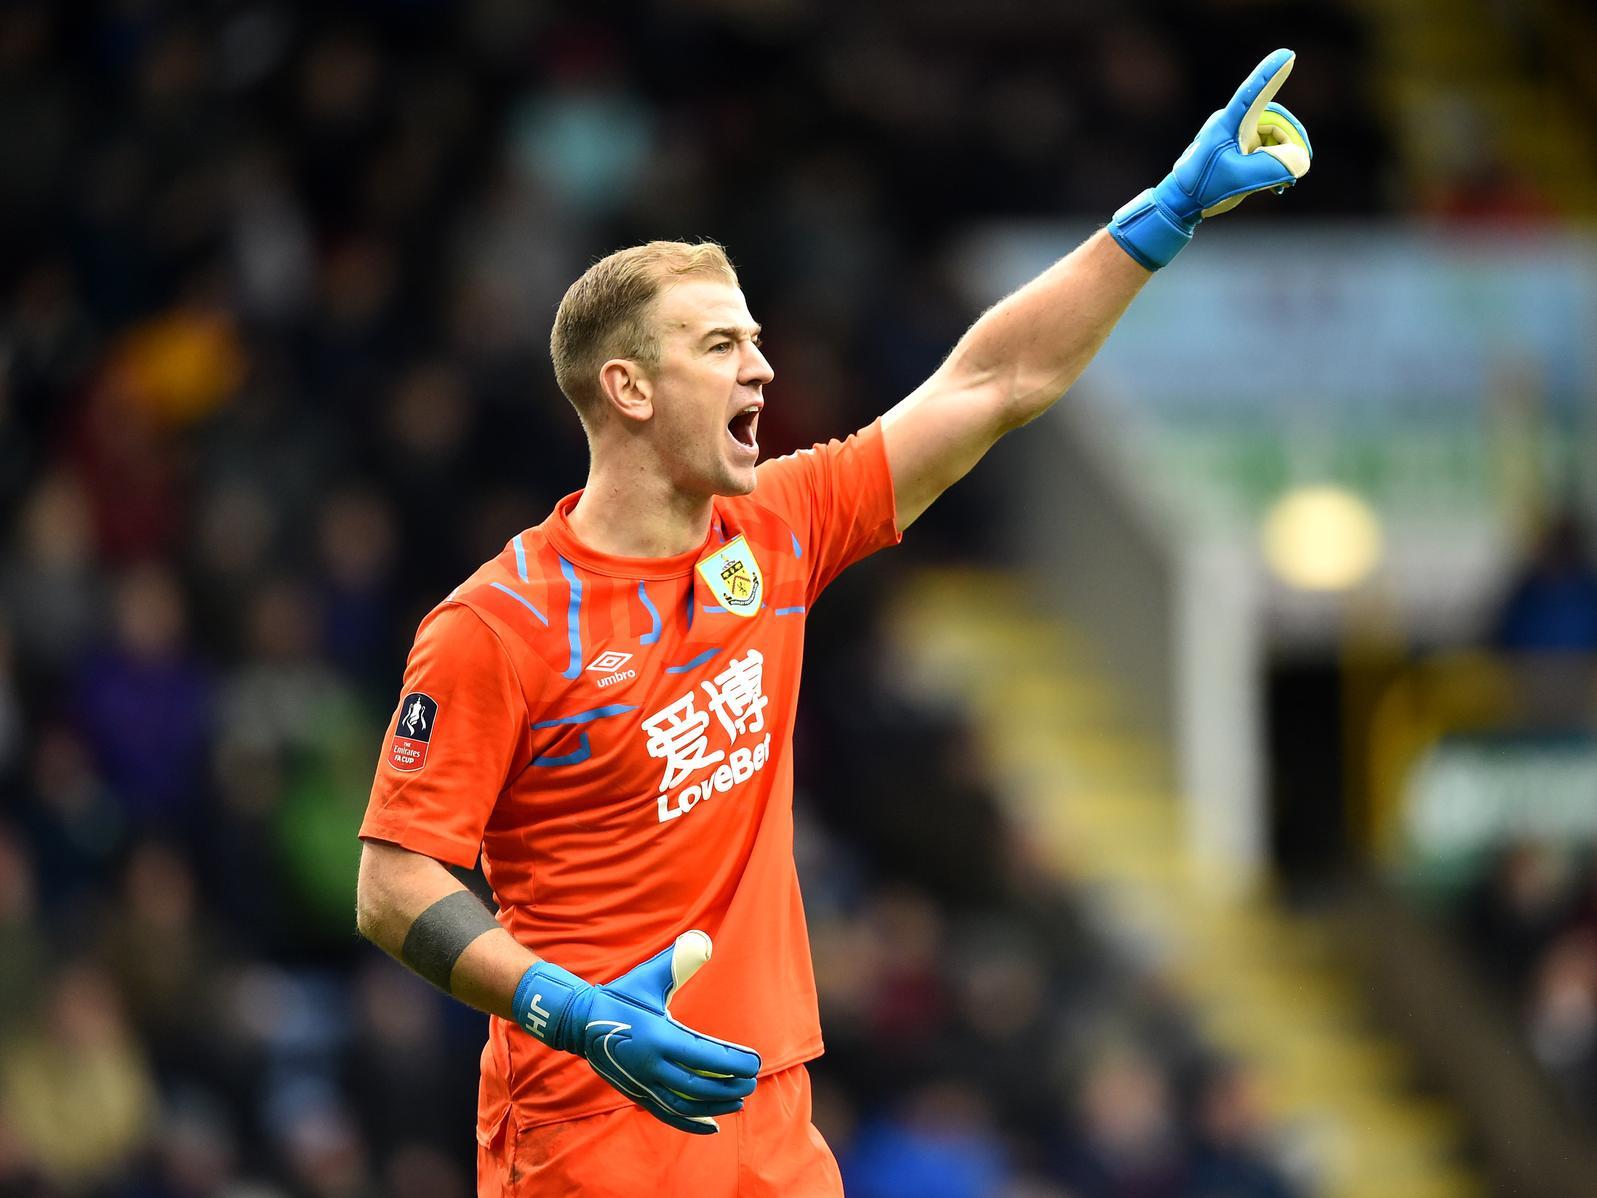 The ex-England international goalkeeper has been linked with a Turf Moor exit and has previously been 8/1 on yo join AFC Bournemouth.